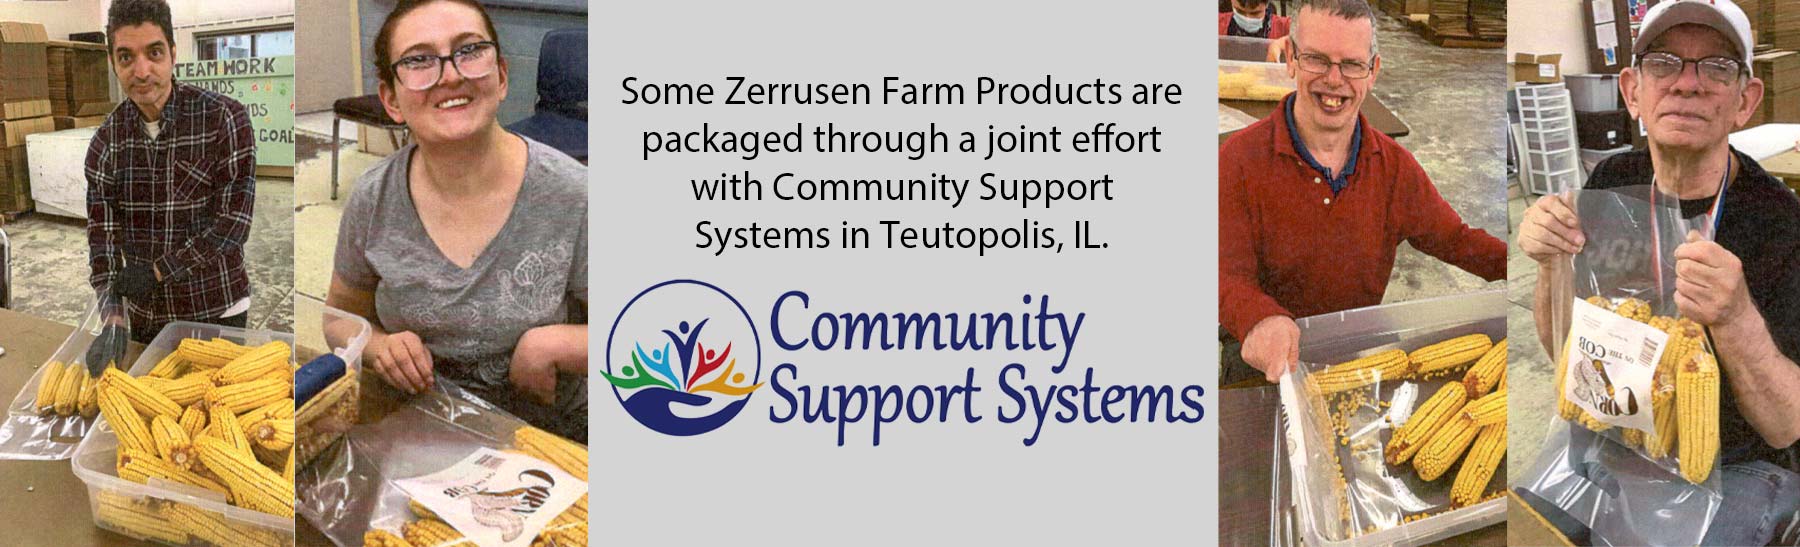 Some Zerrusen Farm Products are packaged through a joint effort with Community Support Systems in Teutopolis, IL.